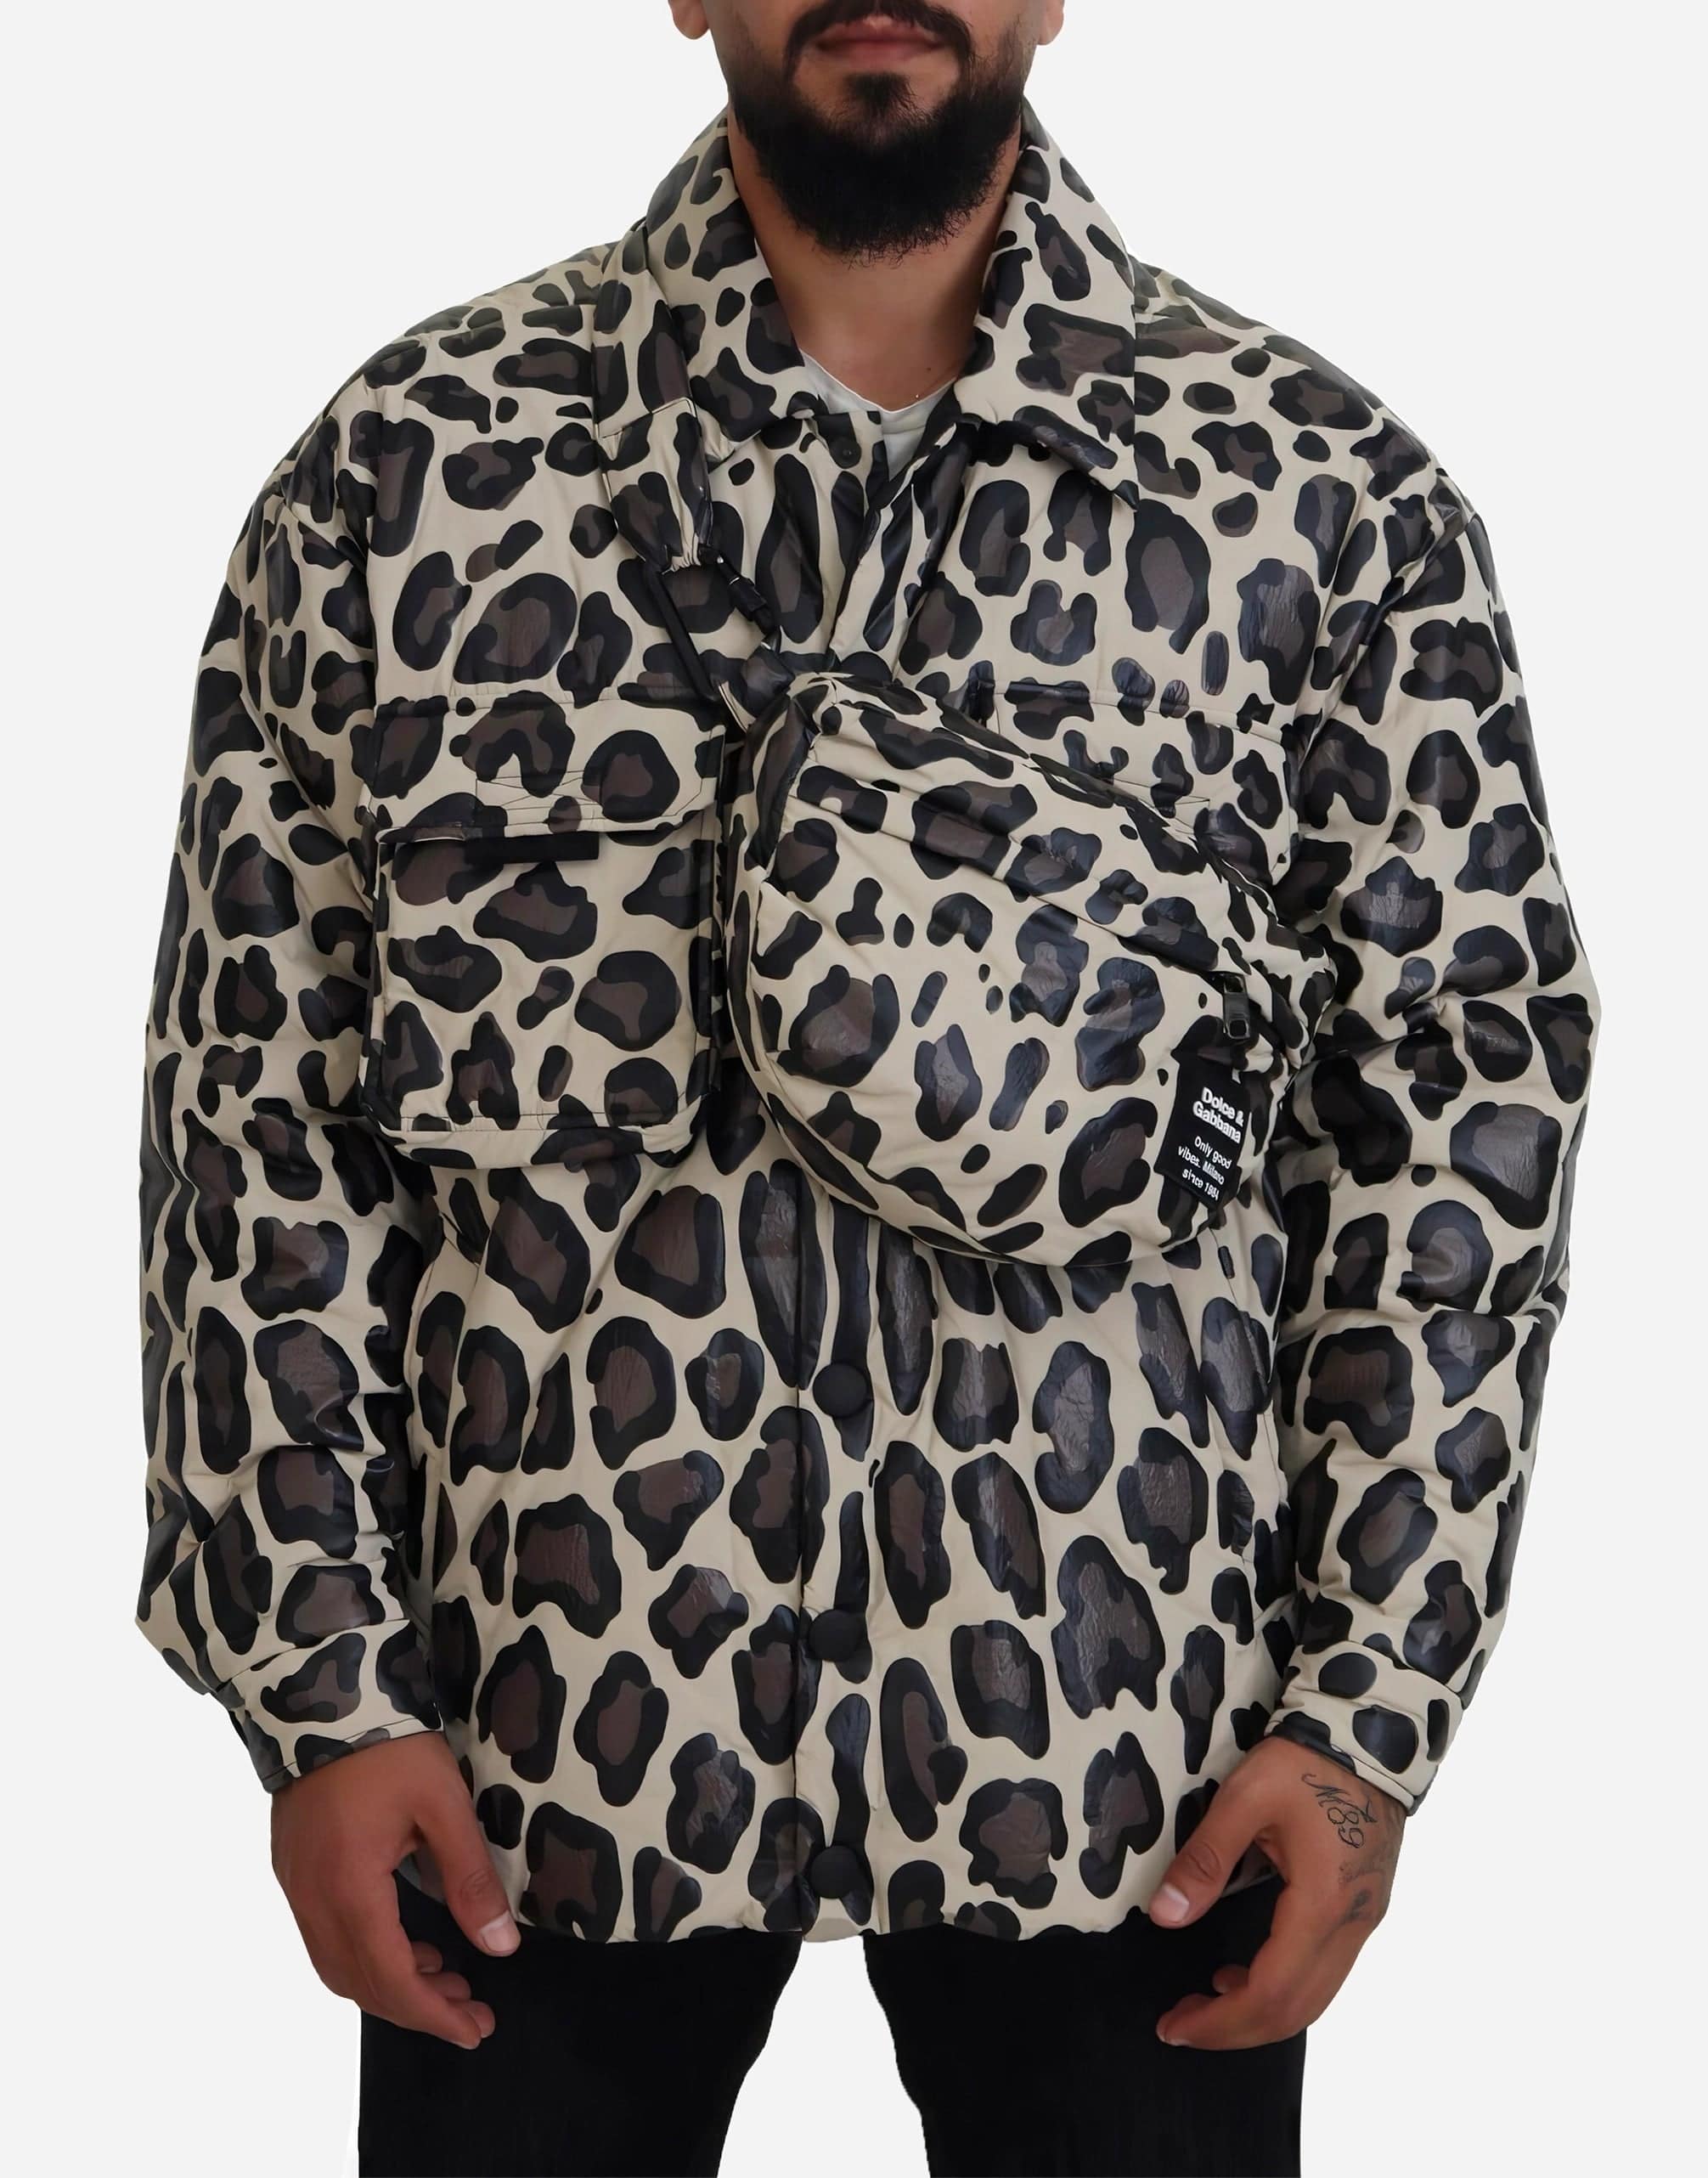 Dolce & Gabbana Leopard Print Technical Jacket With Bag